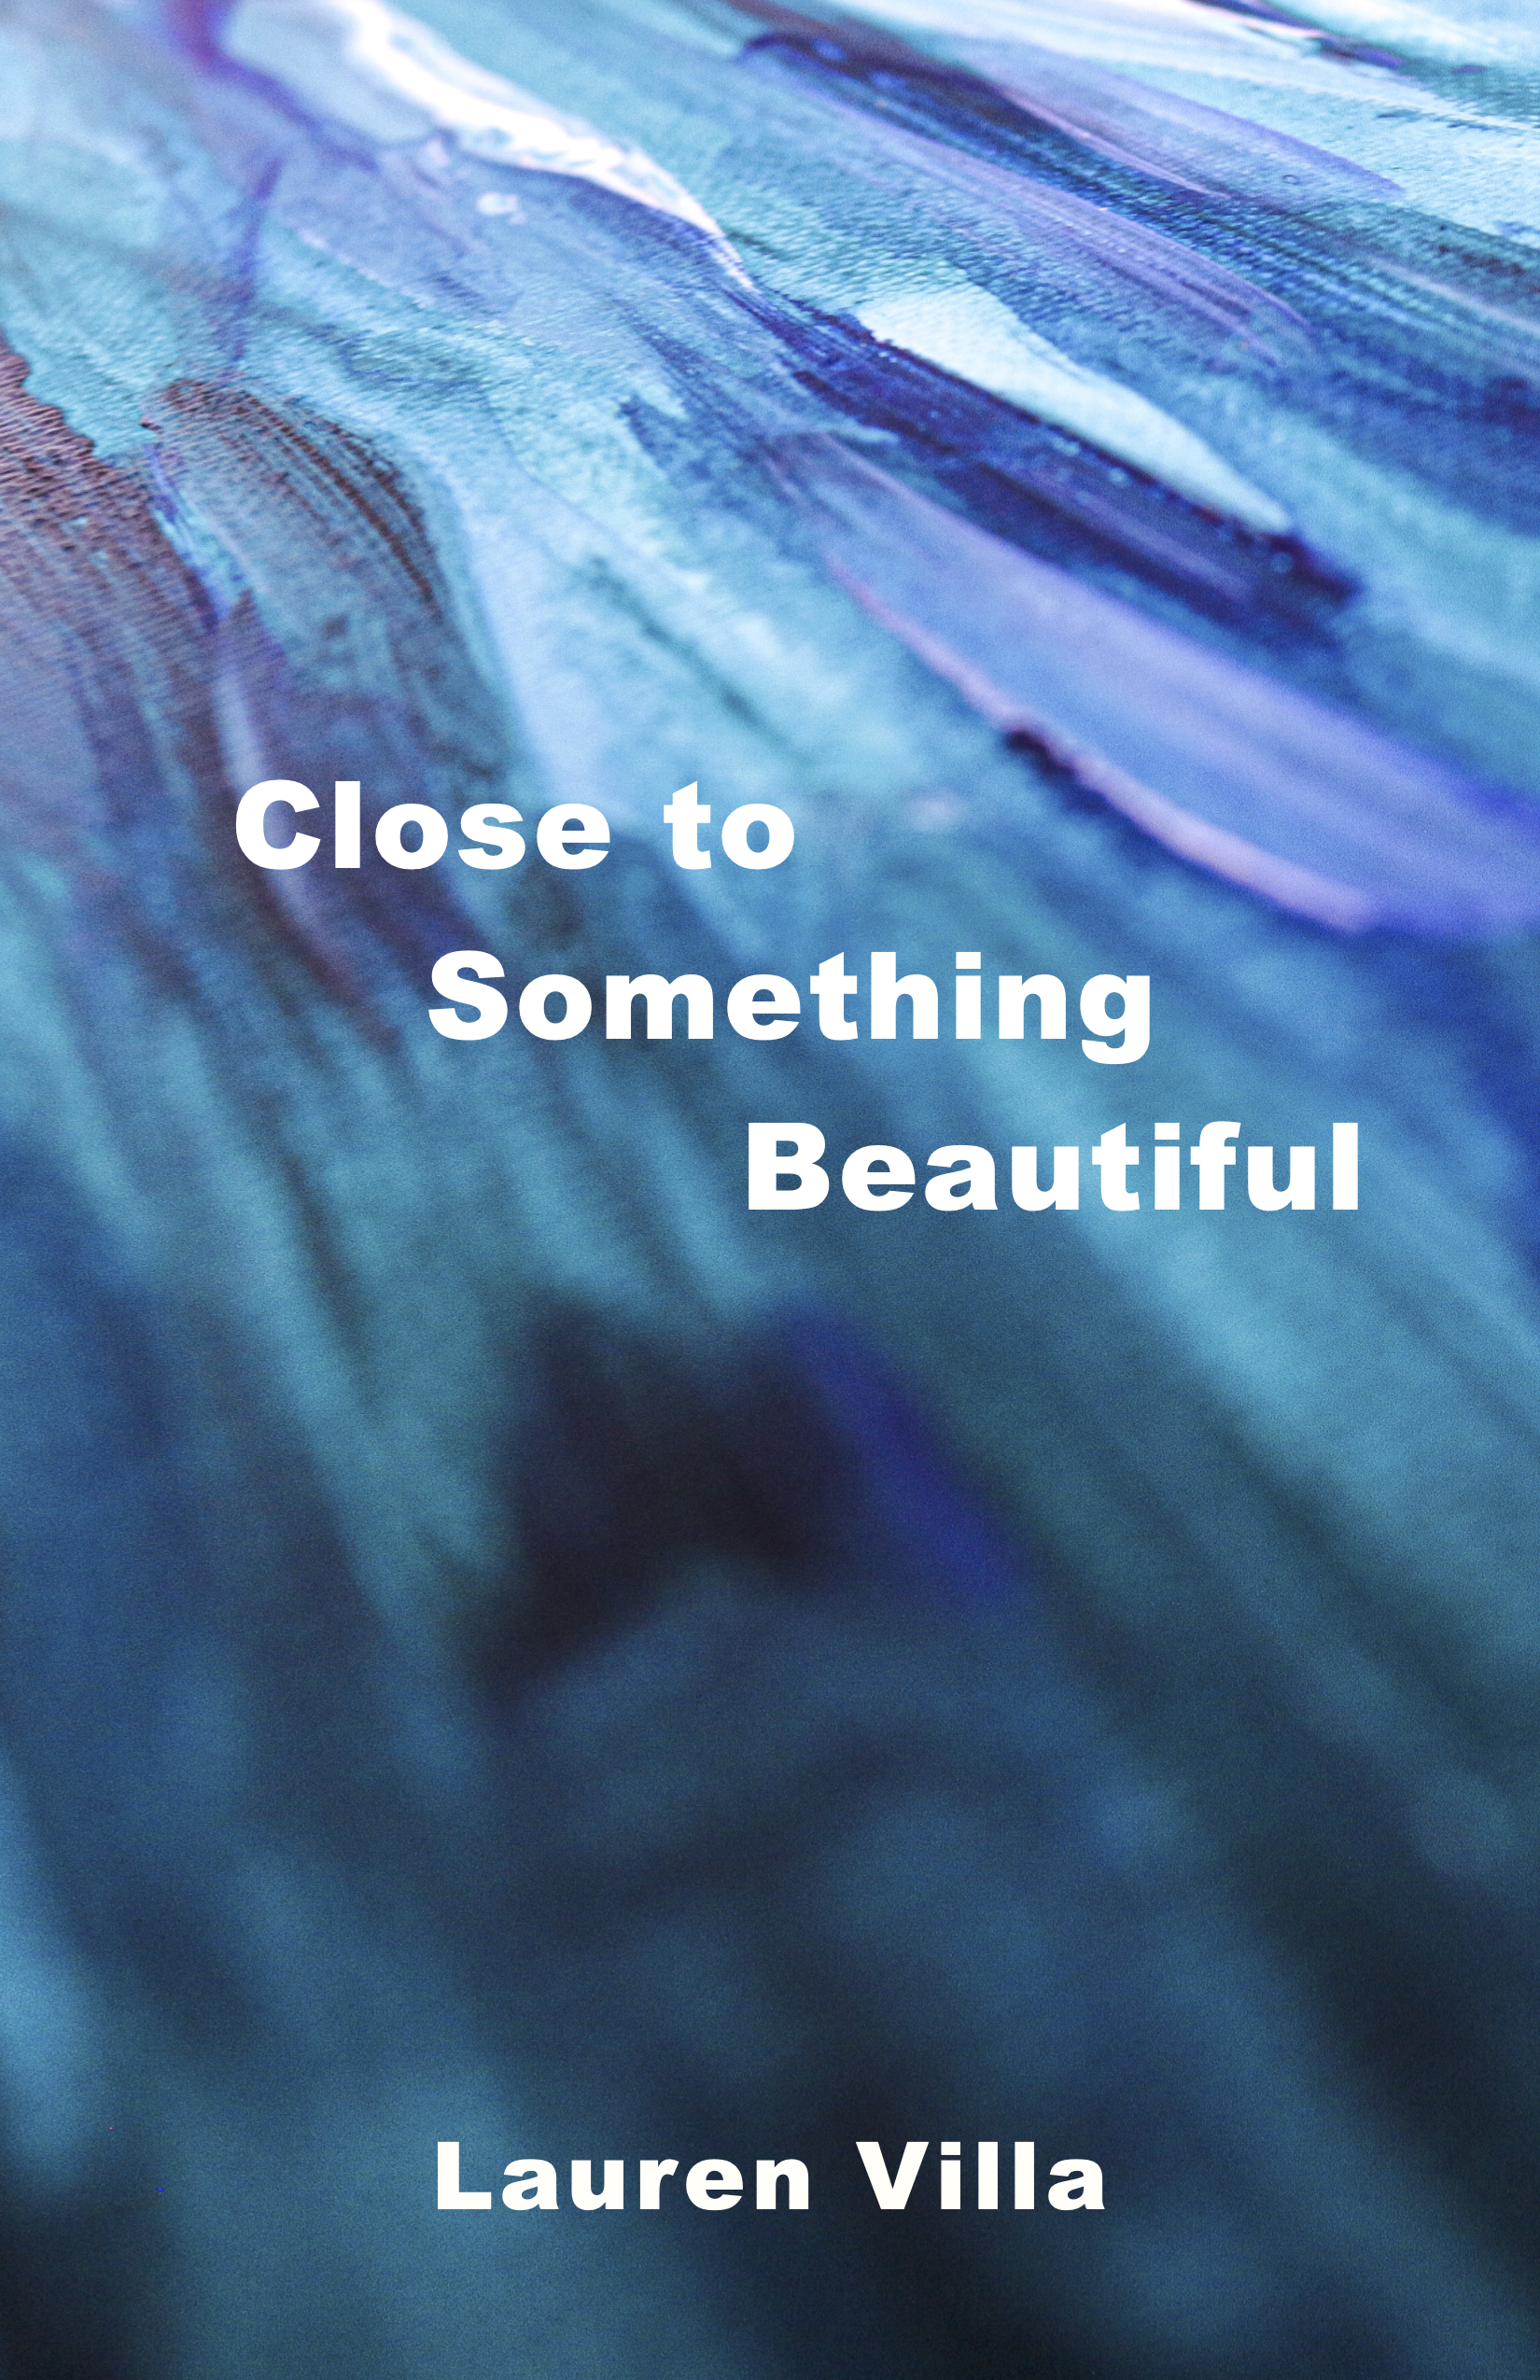 Close to Something Beautiful by Lauren Villa